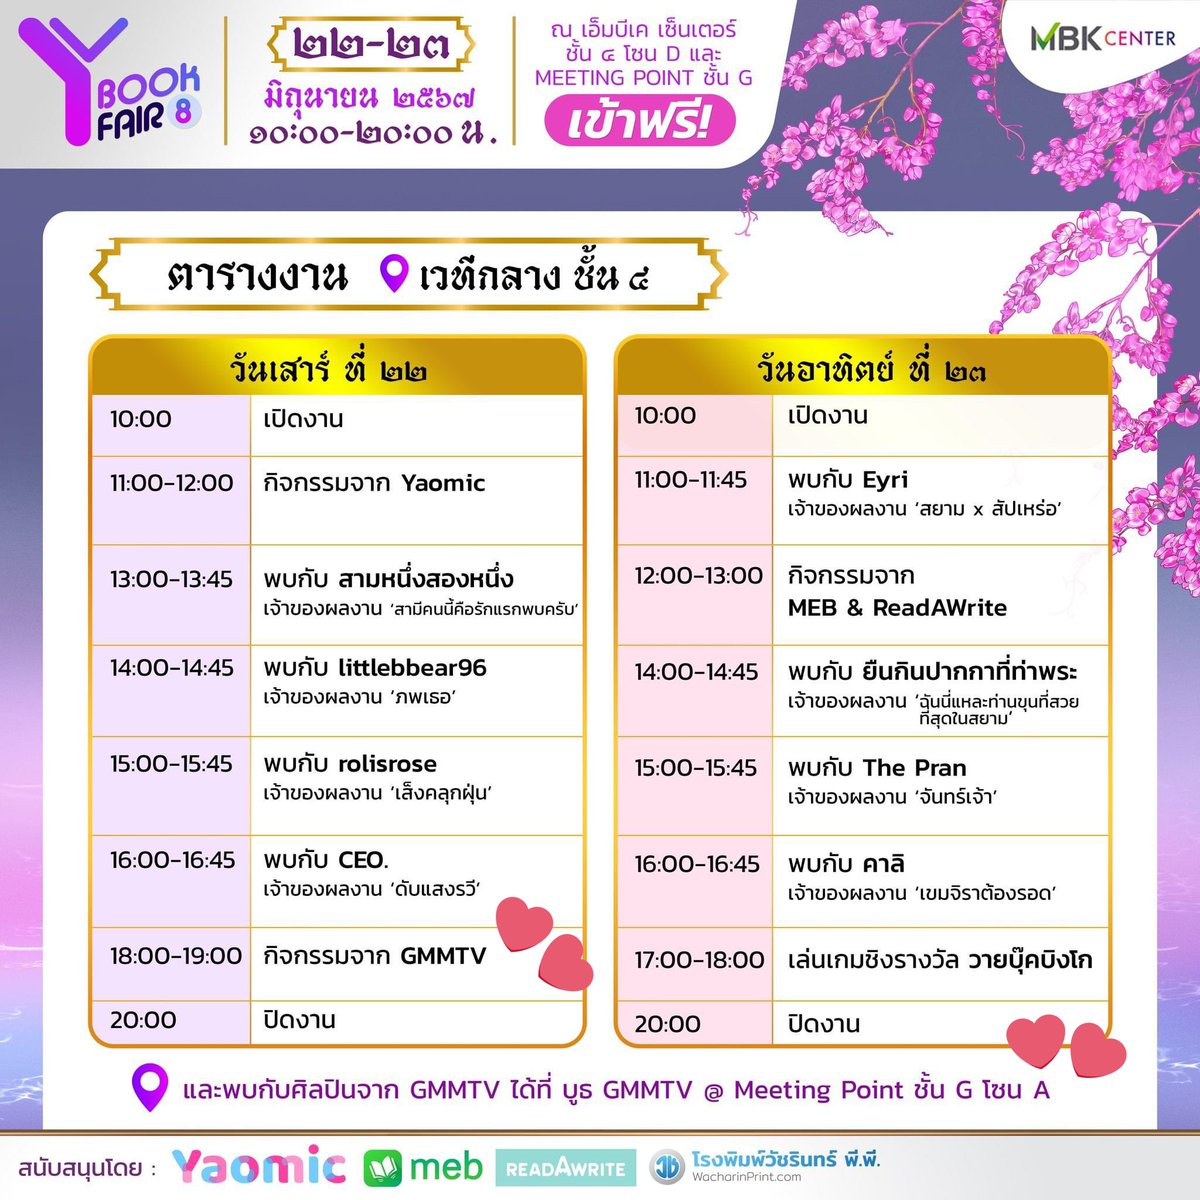 on june 22, there will be a segment for GMMTV activities + meet the artists on the Y Book Fair!! 

if the chances are right, markohm might be there to promote the novel but let's wait and see 🥹🤍

꒰ #MarkOhm #มาร์คโอม #mmarkpkk #ohmtpk #SweetToothGoodDentist ꒱